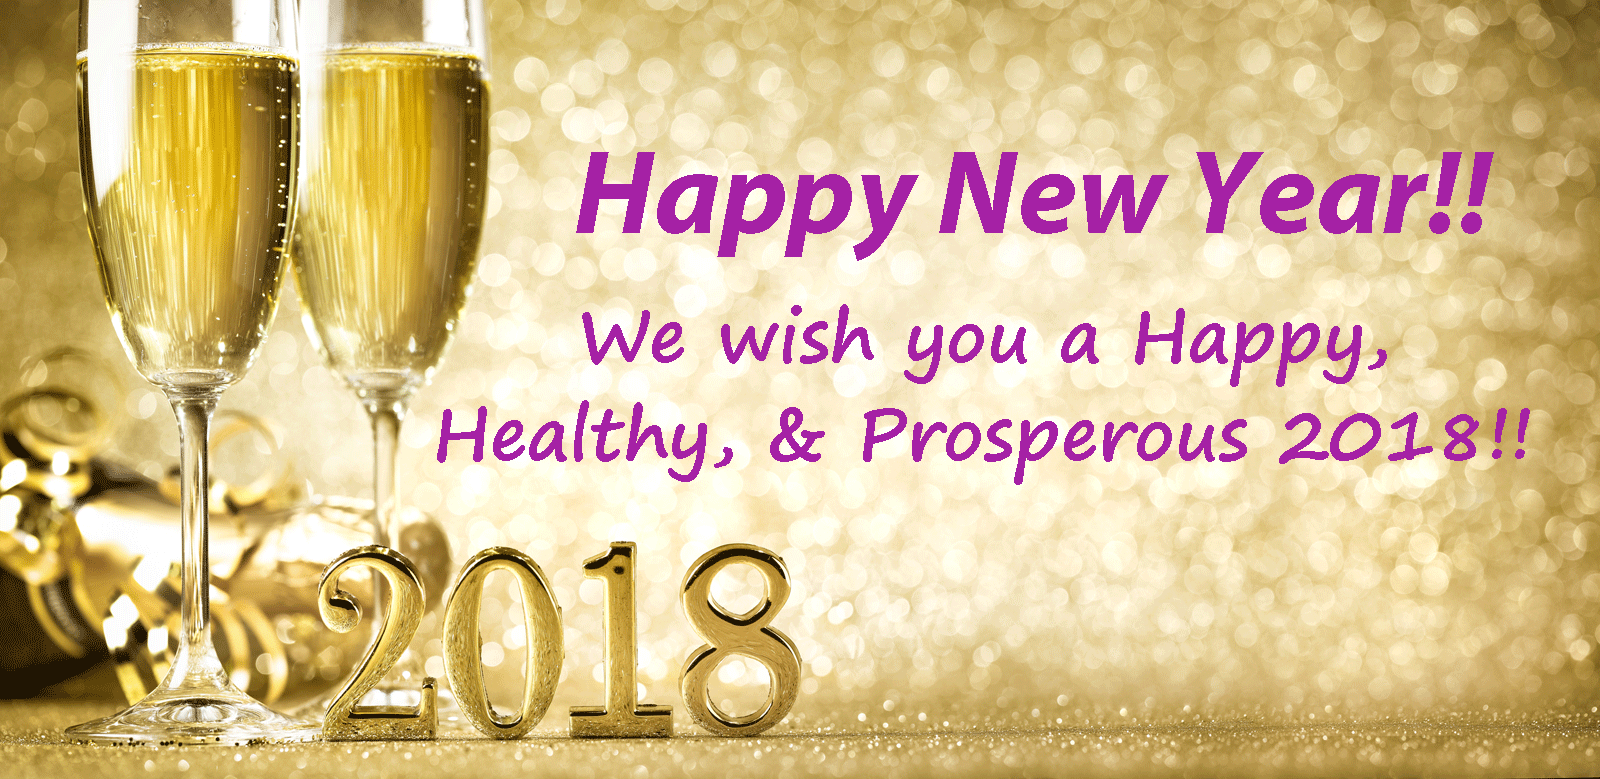 Happy New Year message